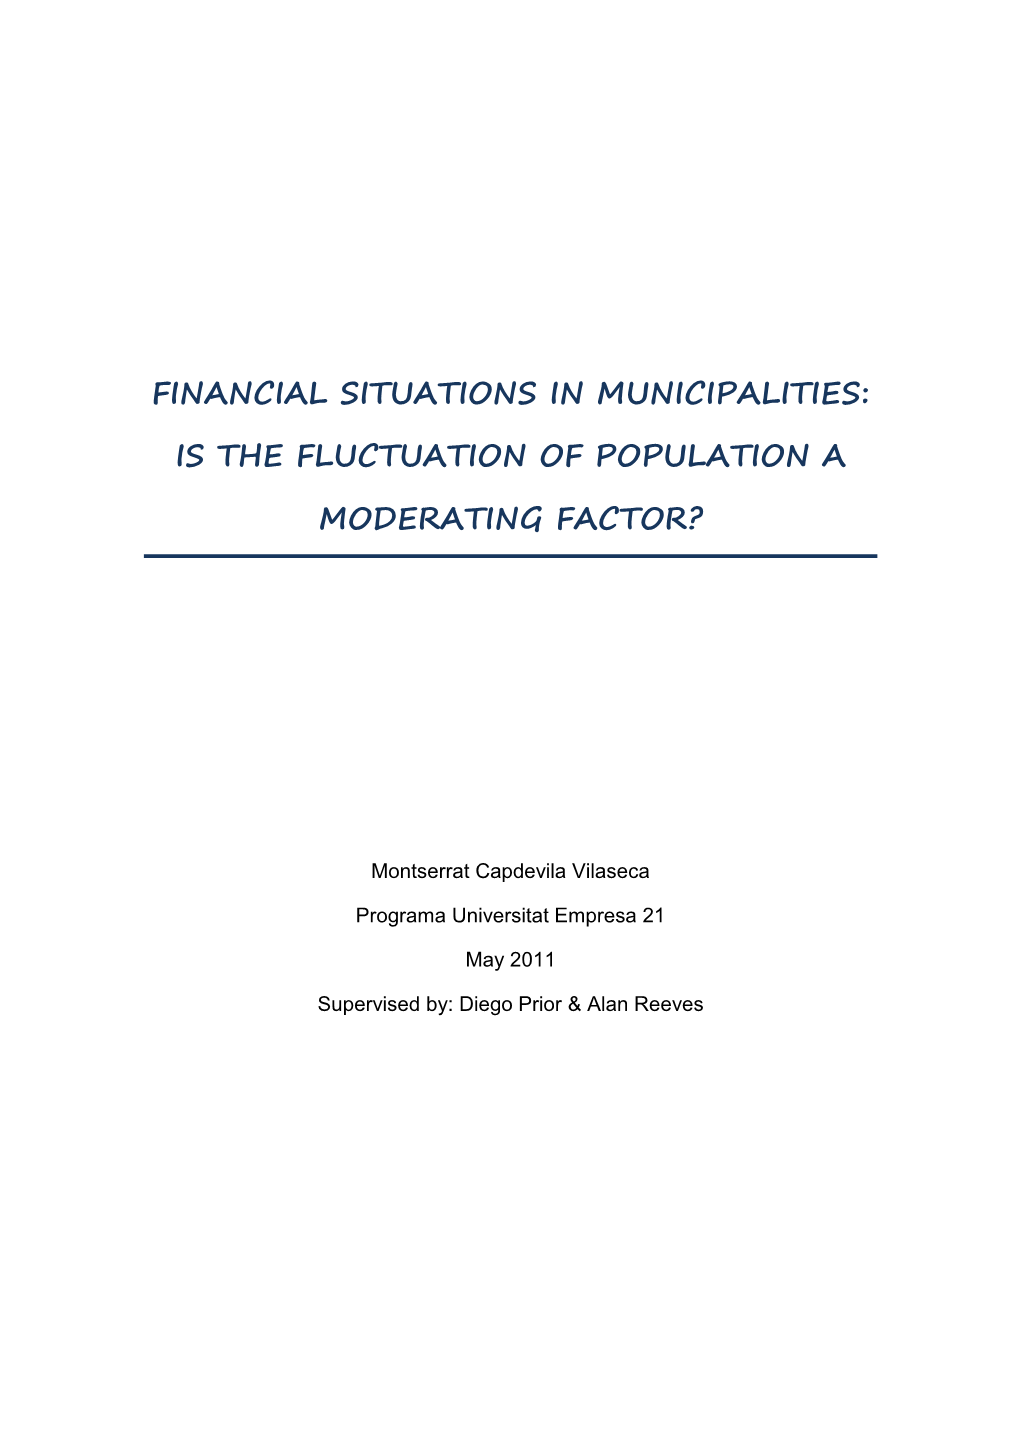 Financial Situations in Municipalities: Is the Fluctuation of Population A